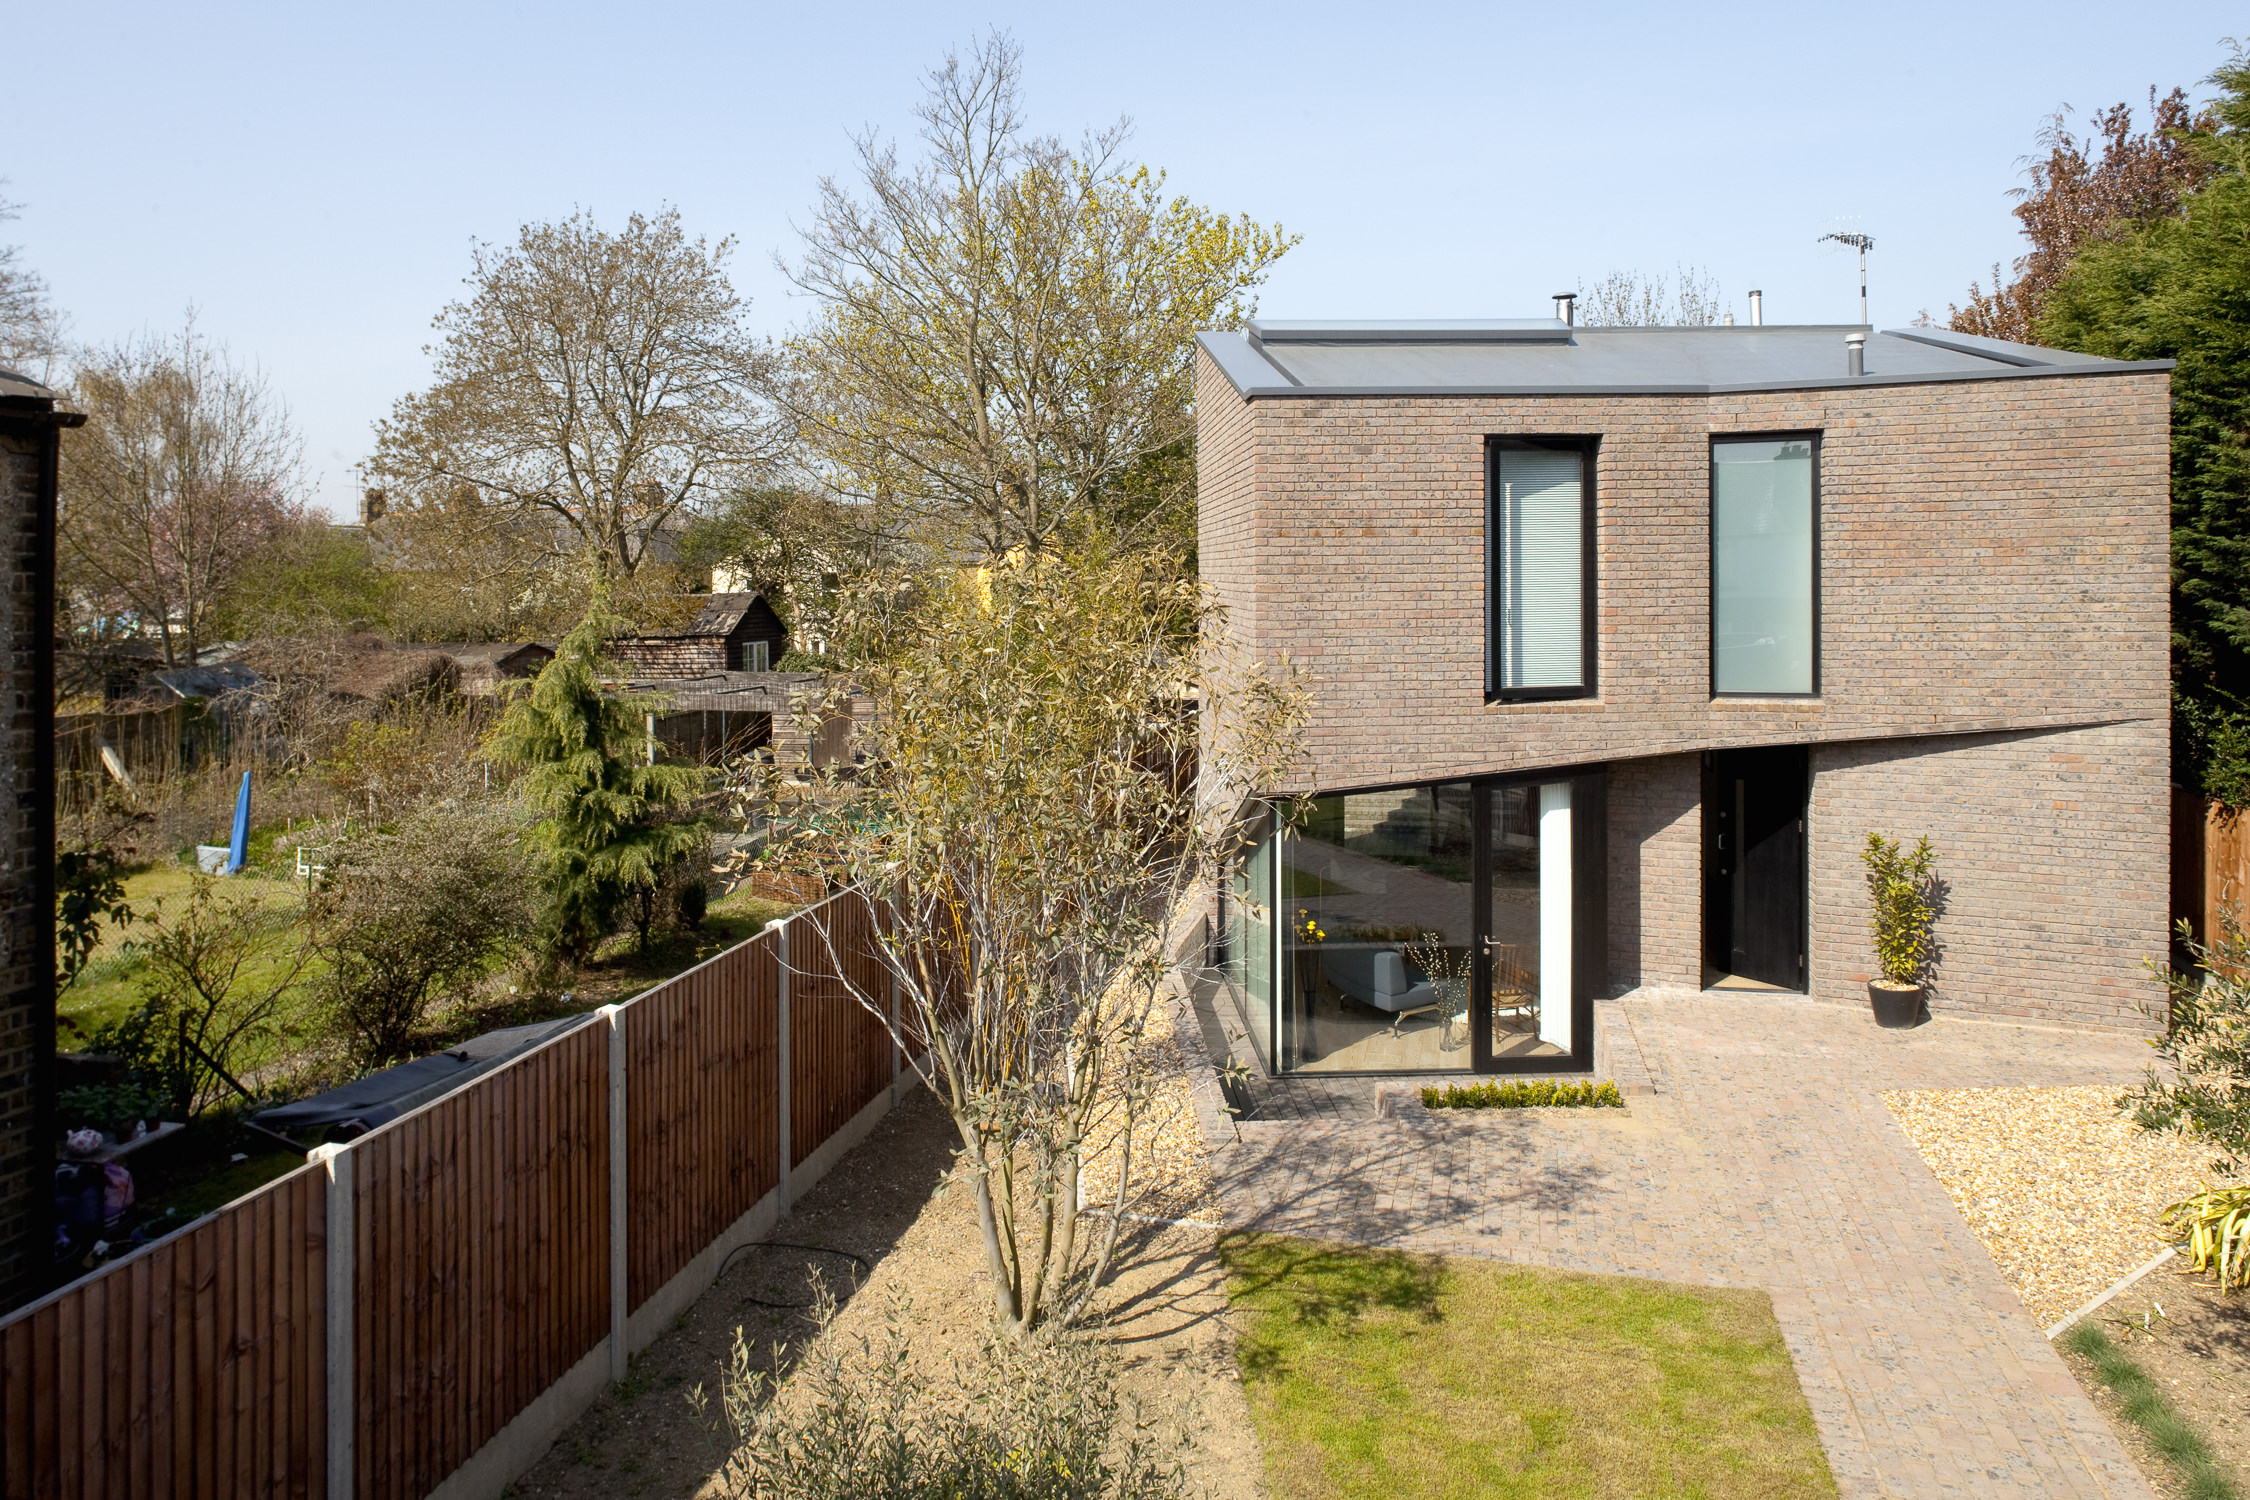 architecture-photography-london-frobisher-house-duggan-morris